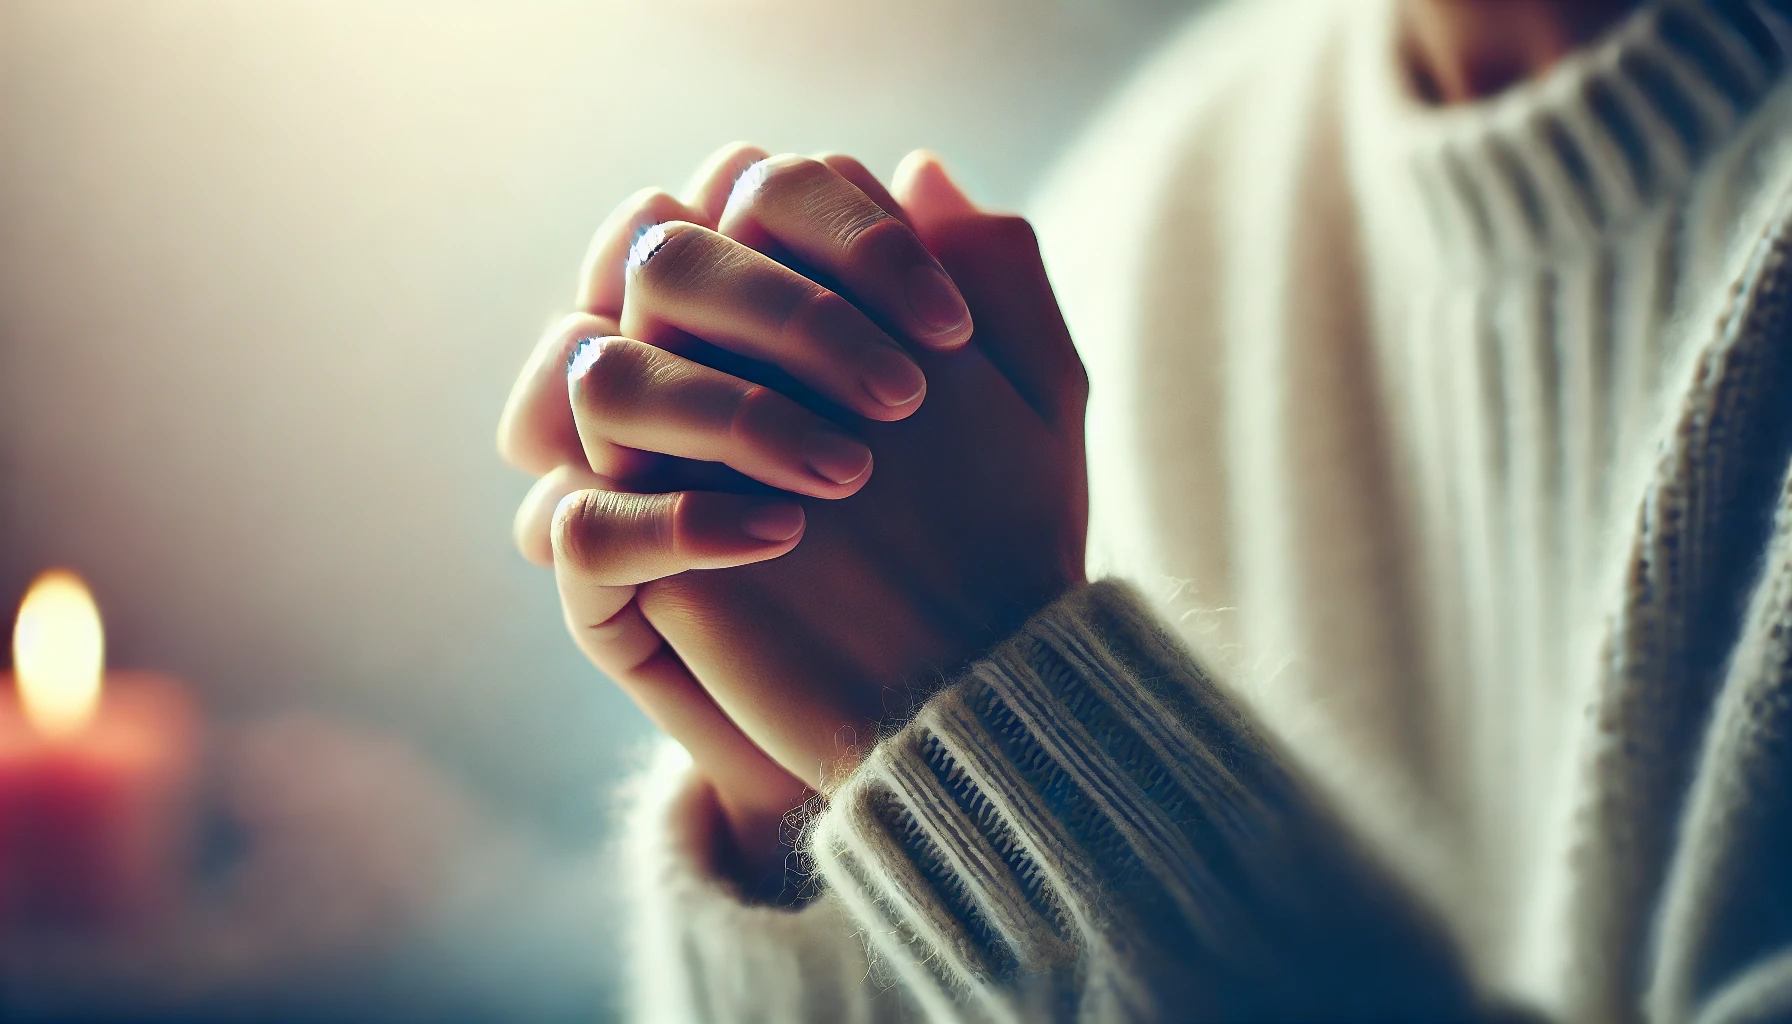 20 Prayer Points For Every Christian